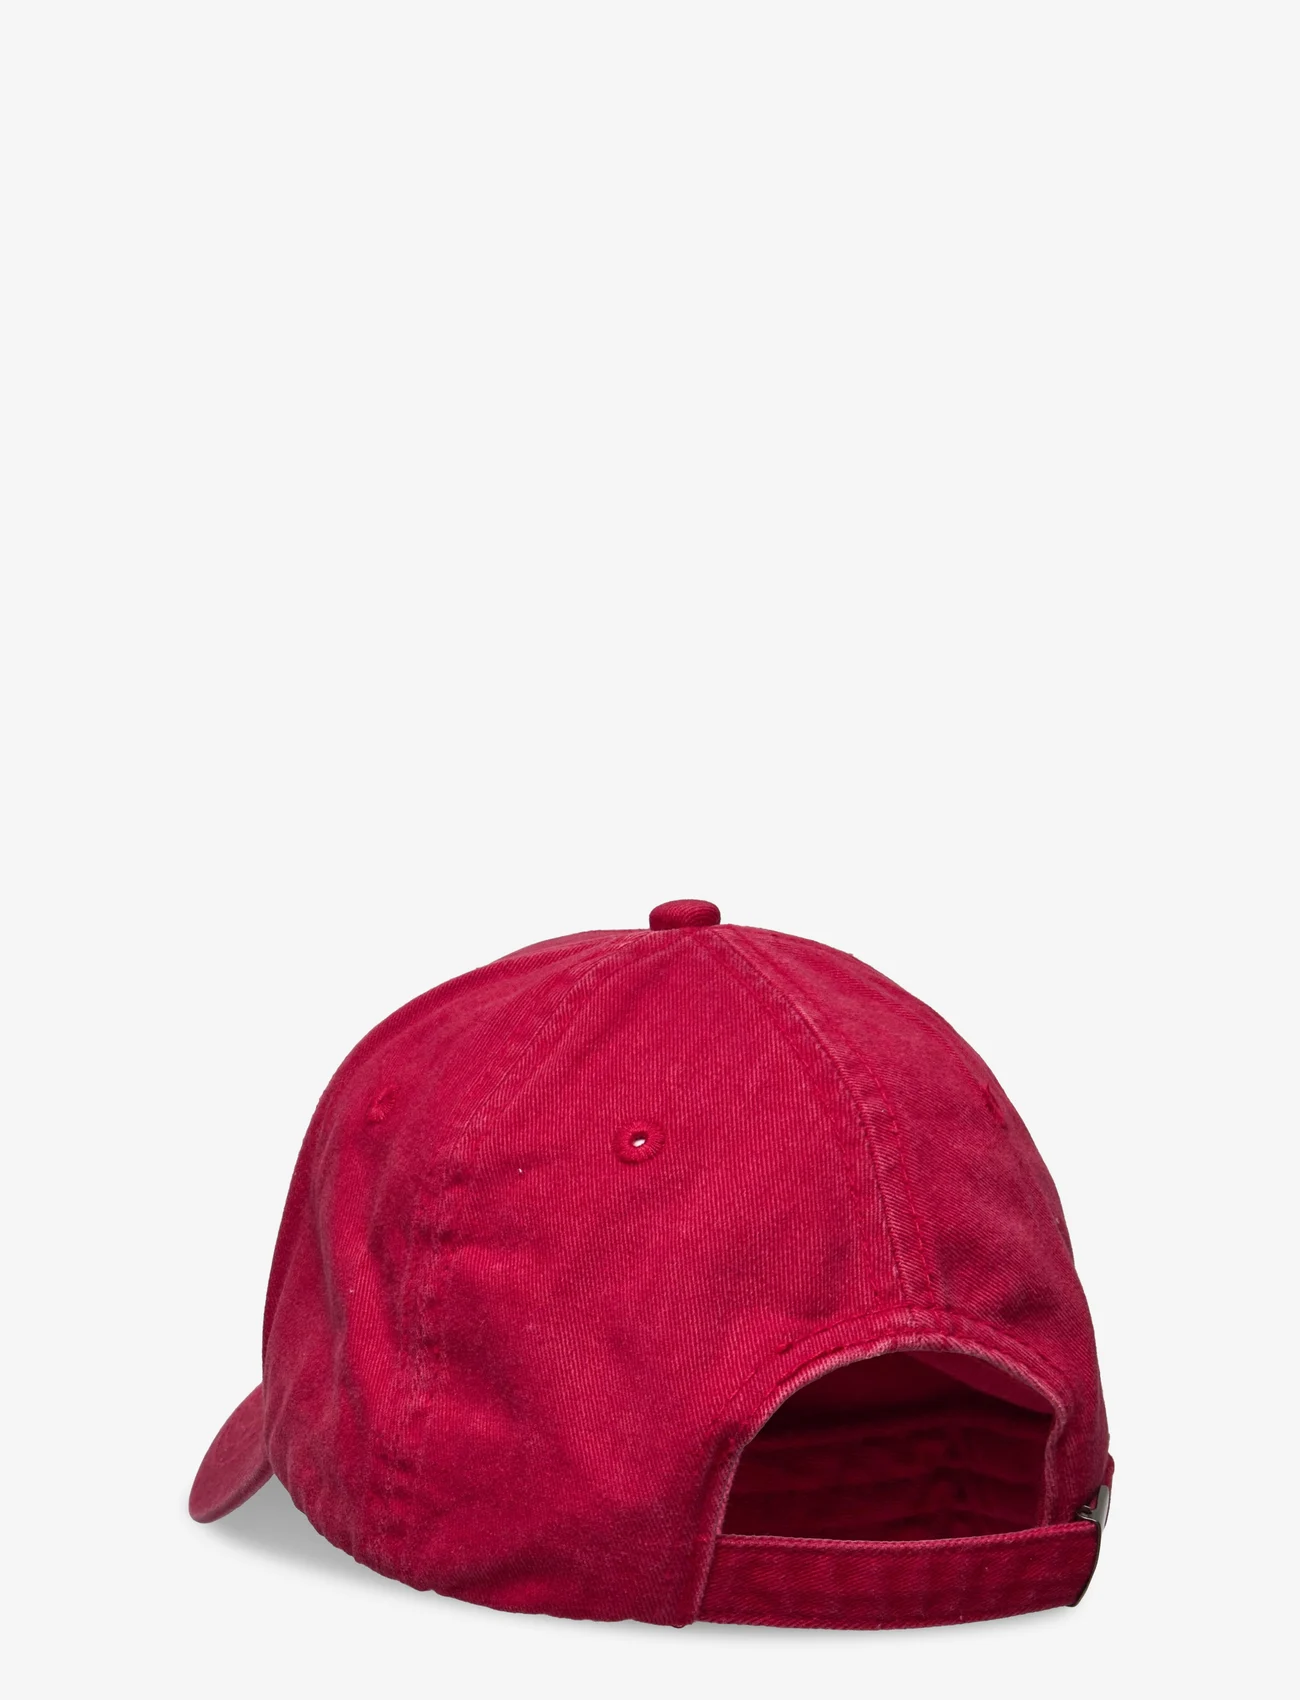 HOLZWEILER - Sirup Washed Caps - red - 1